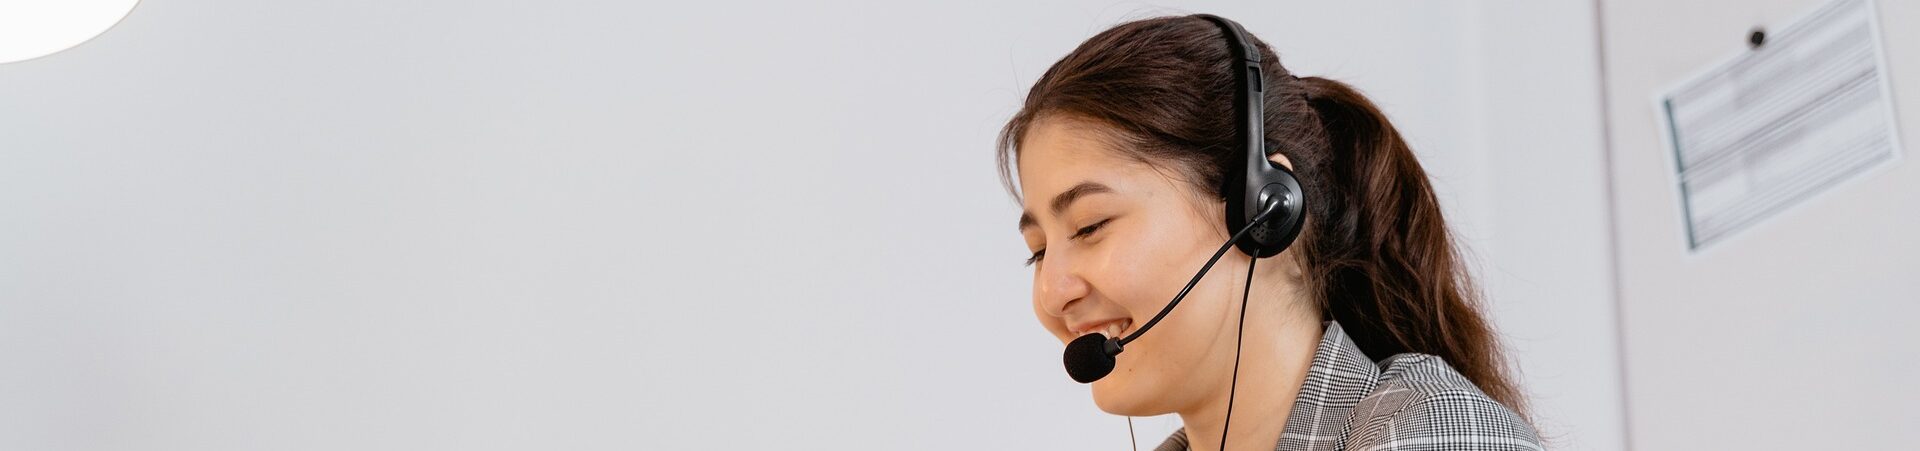 Why a call centre course might be for you